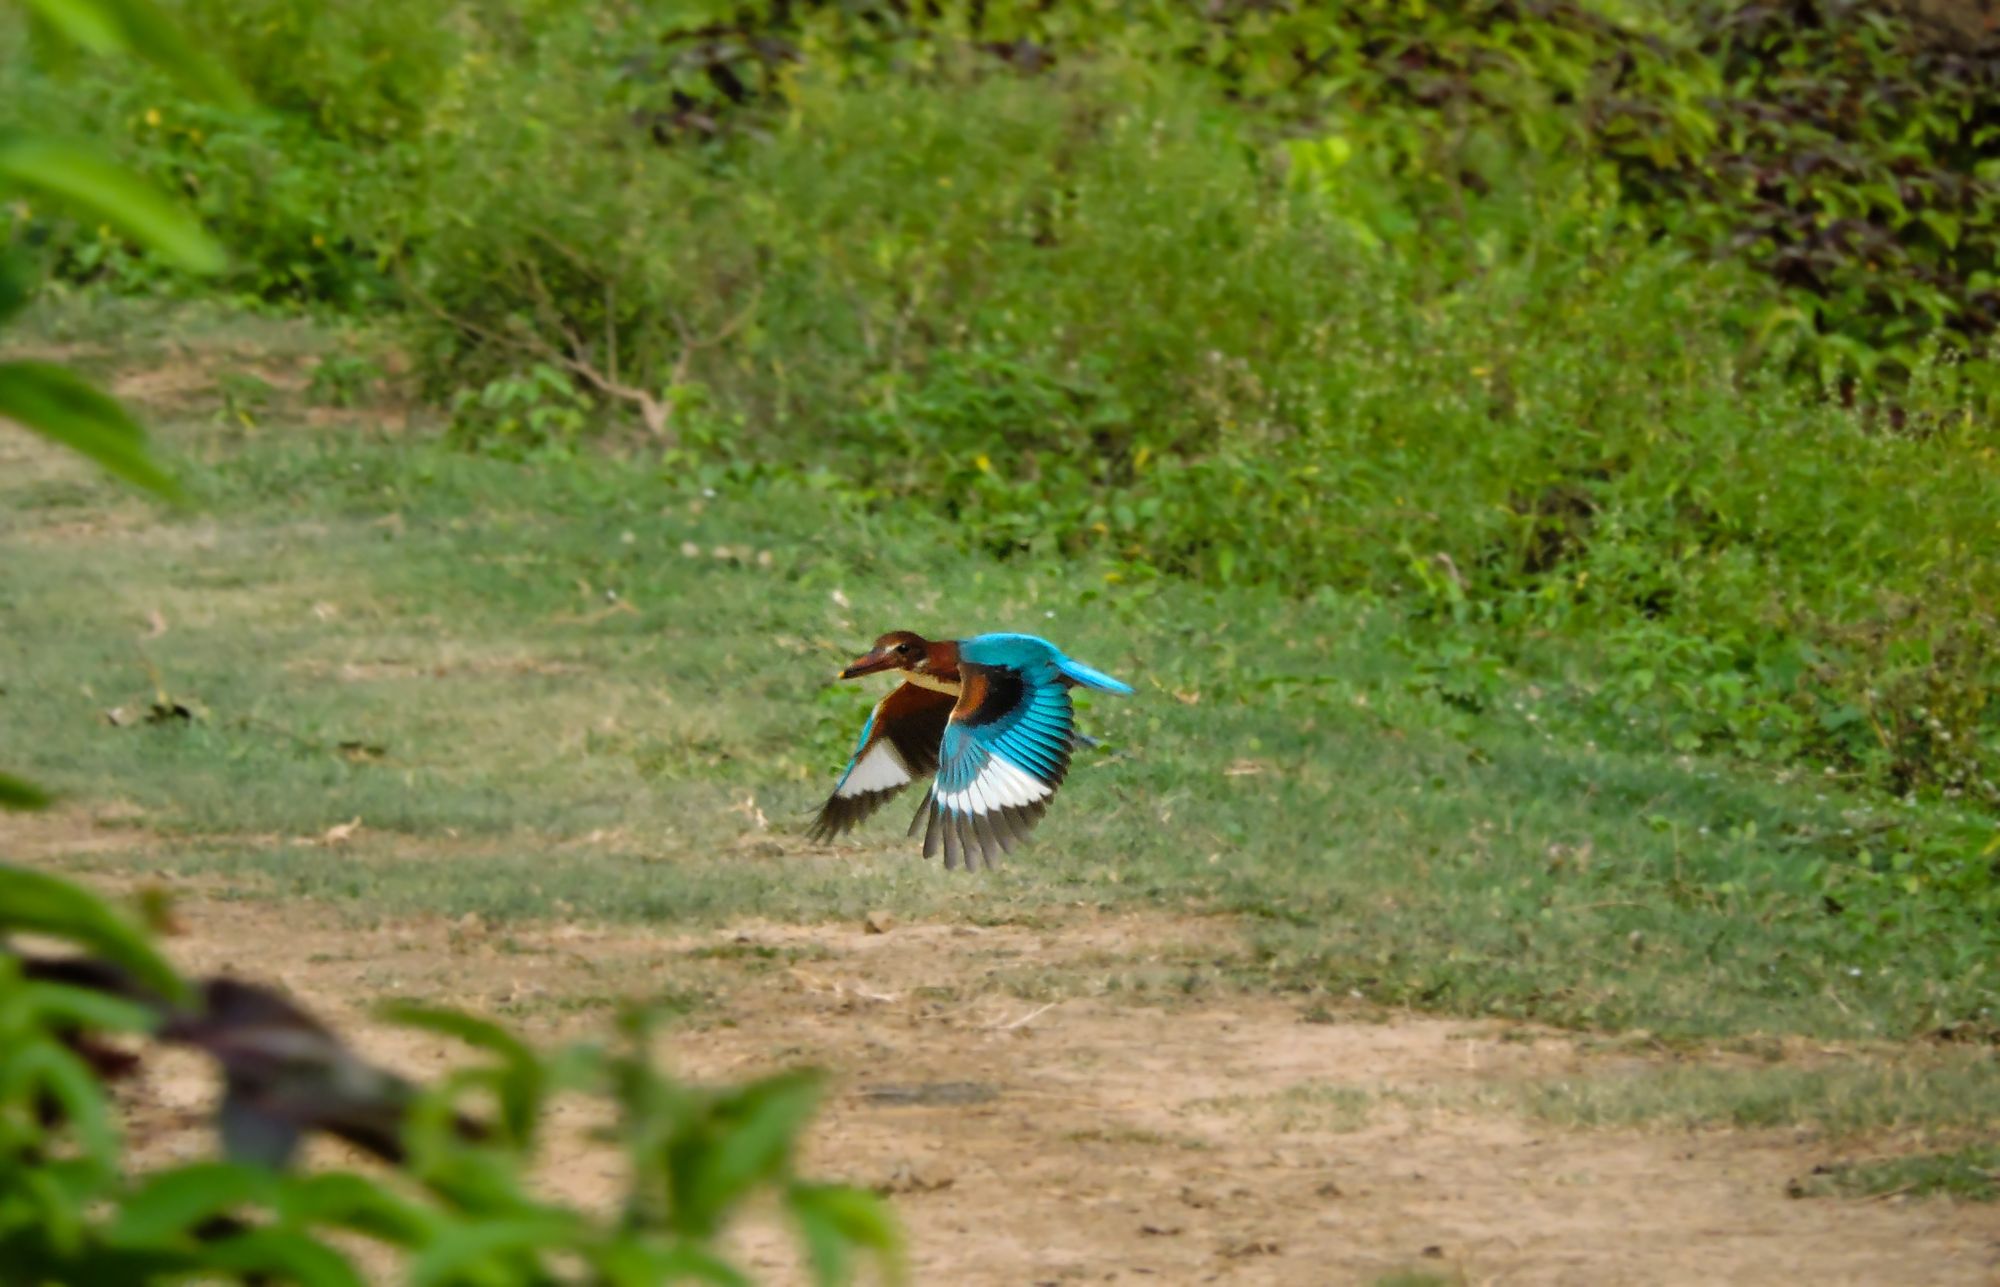 A Flight of Nature - White Breasted Kingfisher